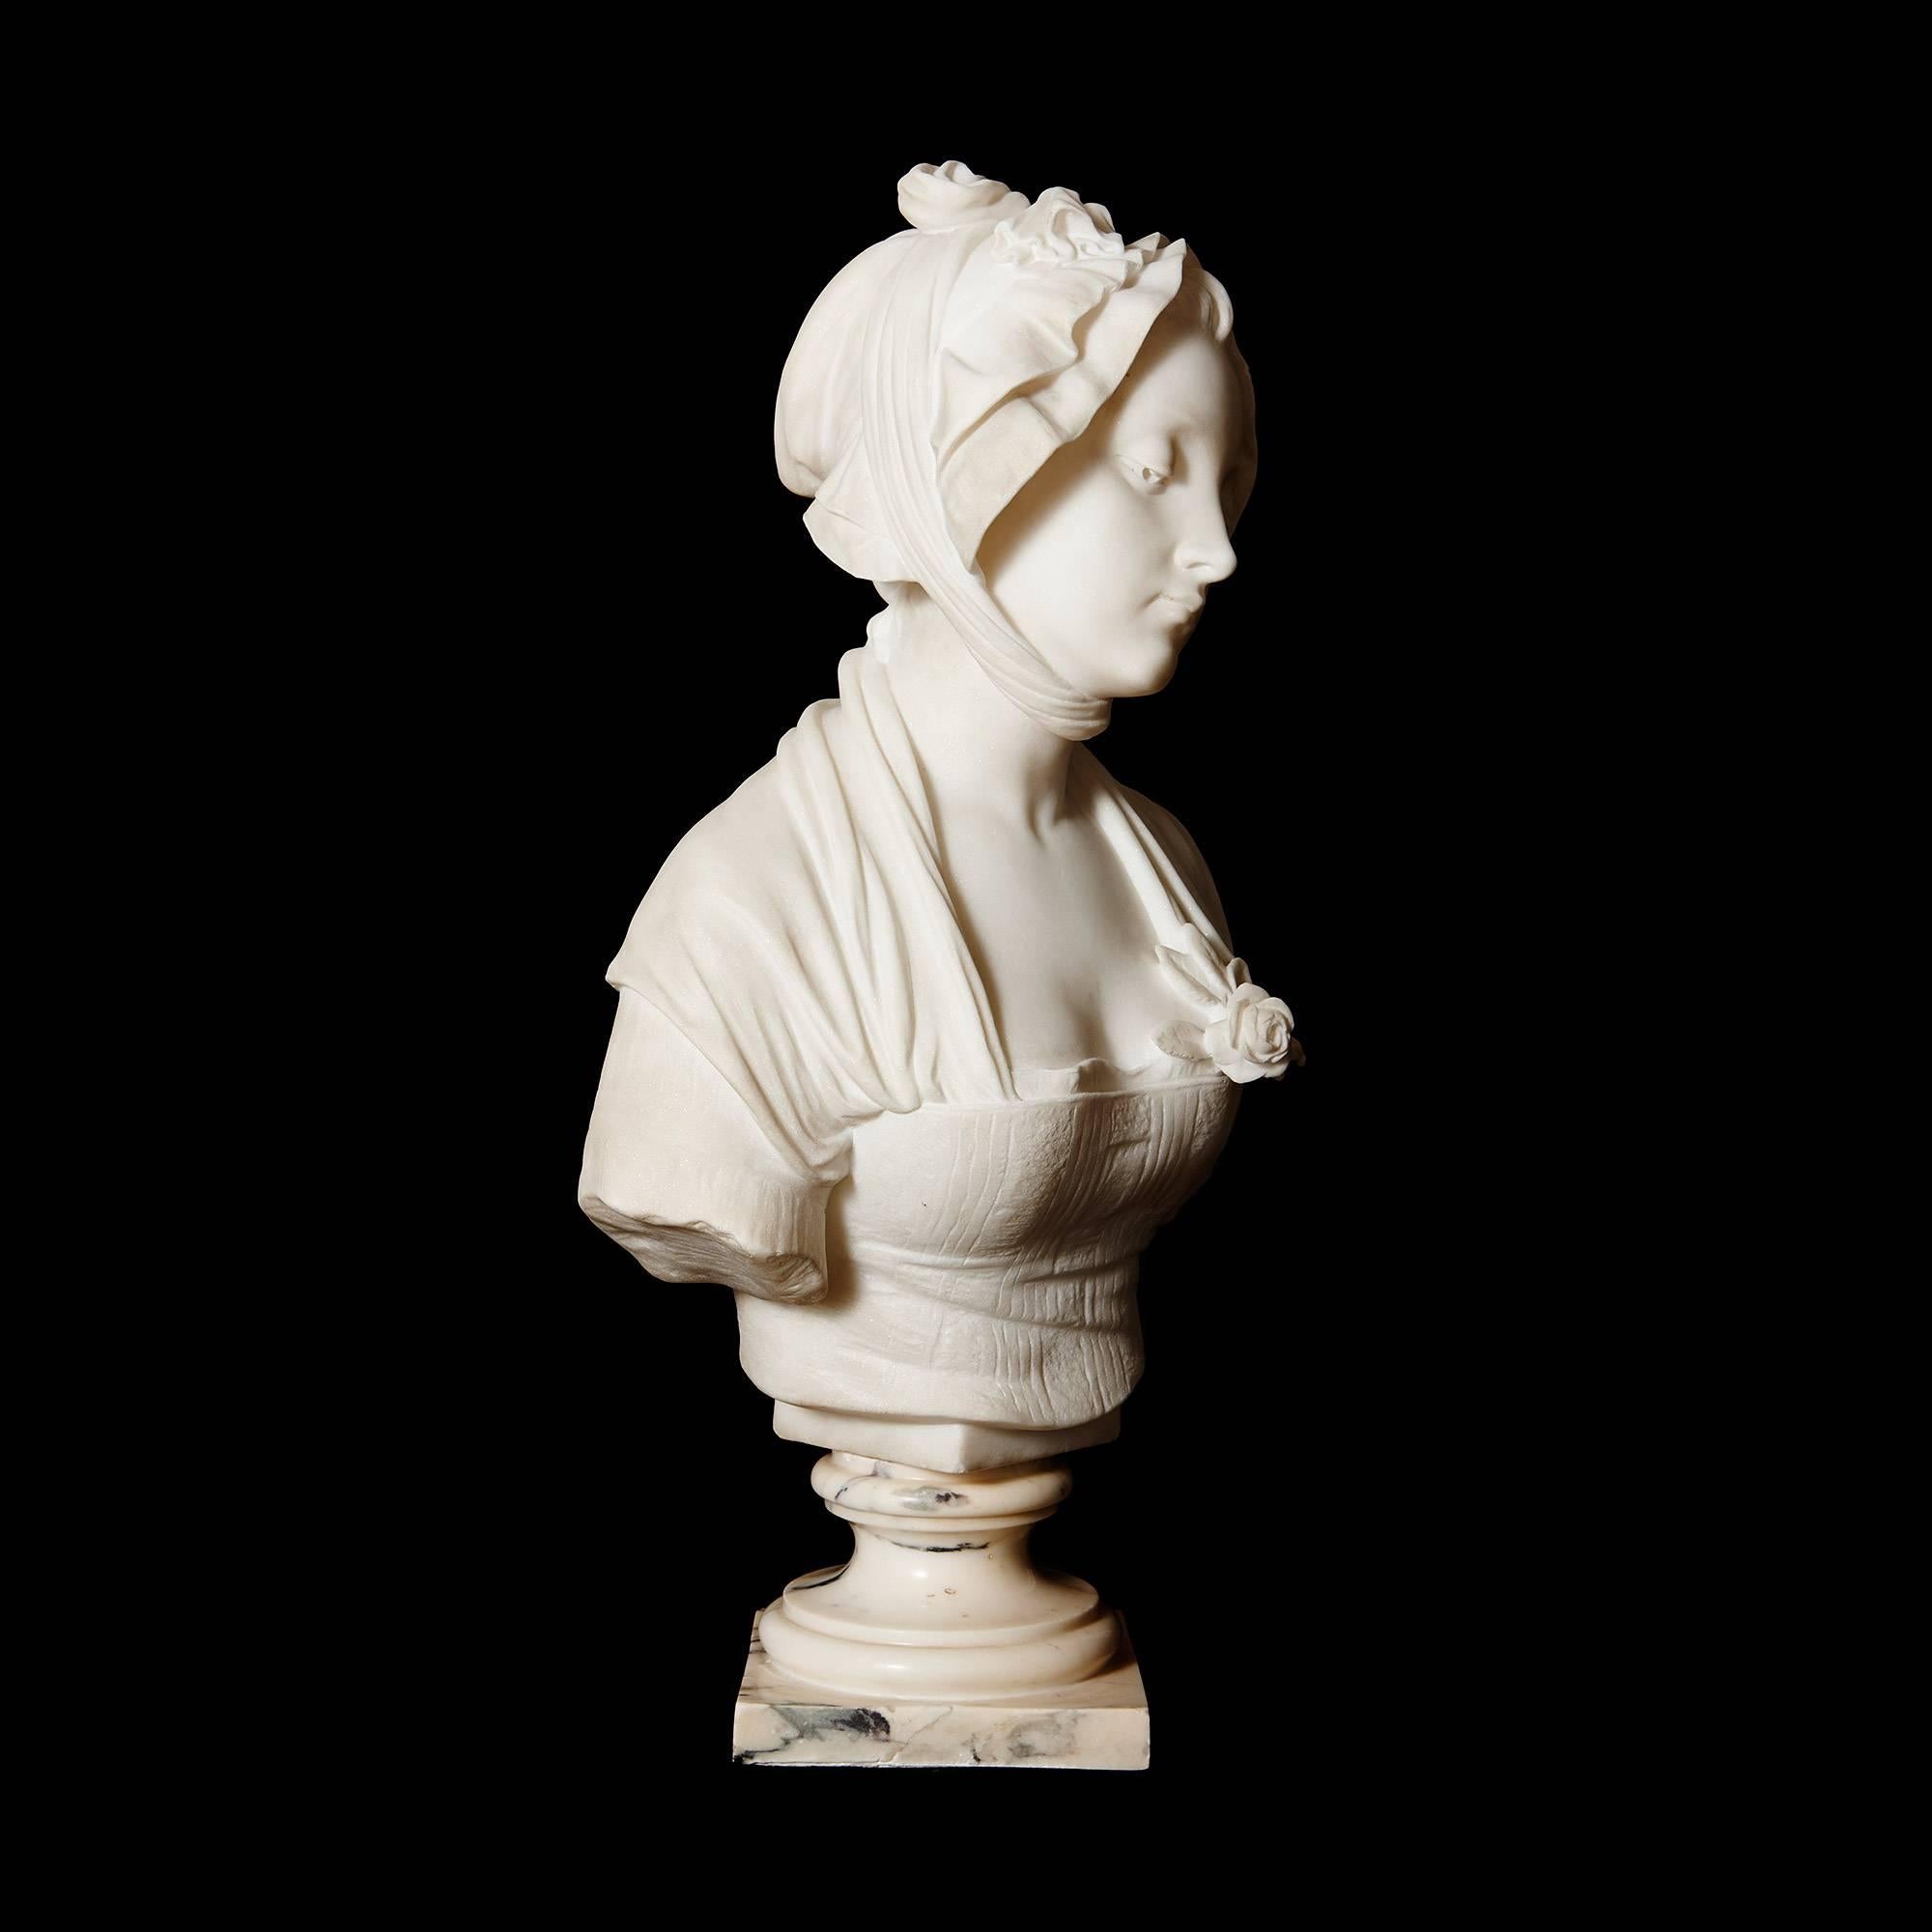 Depicting a young maiden wearing a bonnet, on a veined white marble pedestal.

This antique work is a rare example of a marble bust by the French sculptor Laurent, making it an extremely collectable and impressive piece.